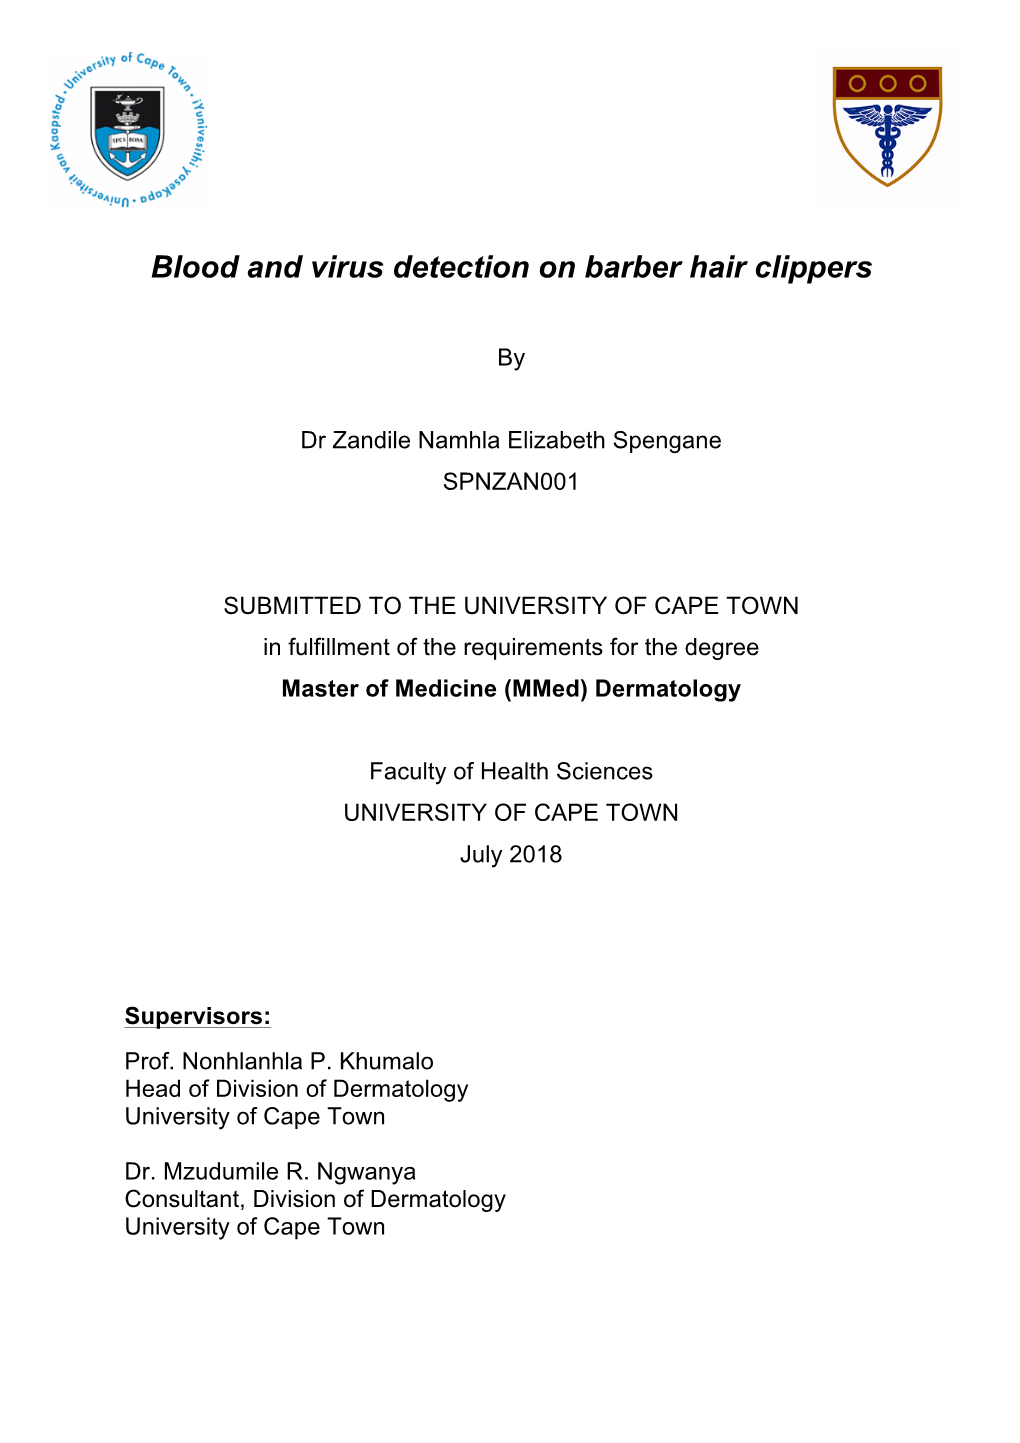 Blood and Virus Detection on Barber Hair Clippers